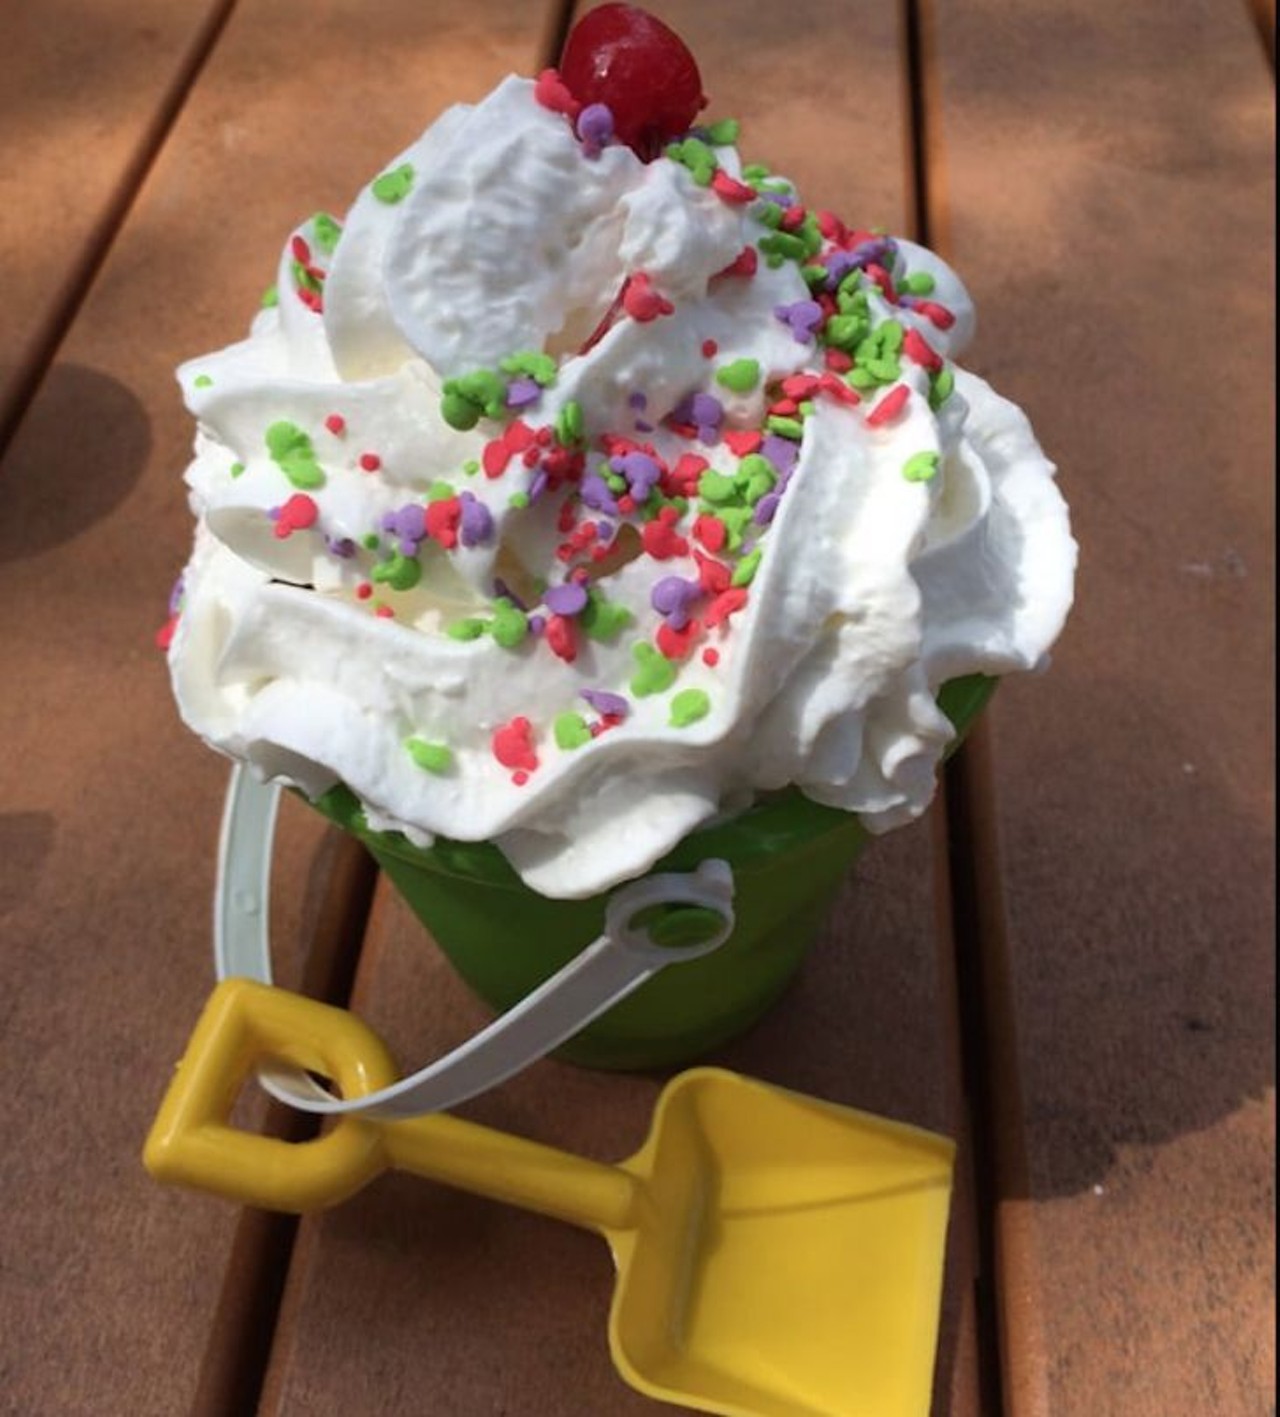 I.C. Expeditions at Blizzard Beach: Sand Pail Sundae  
1534 Blizzard Beach Drive
Cool off on a hot Florida day with a sand pail for dessert. This toy bucket is stuffed with vanilla and chocolate soft-serve ice cream, waffle pieces, cookie pieces, sprinkles, hot fudge and caramel and topped with whipped cream and a cherry.
Photo via Yelp/Tina W.